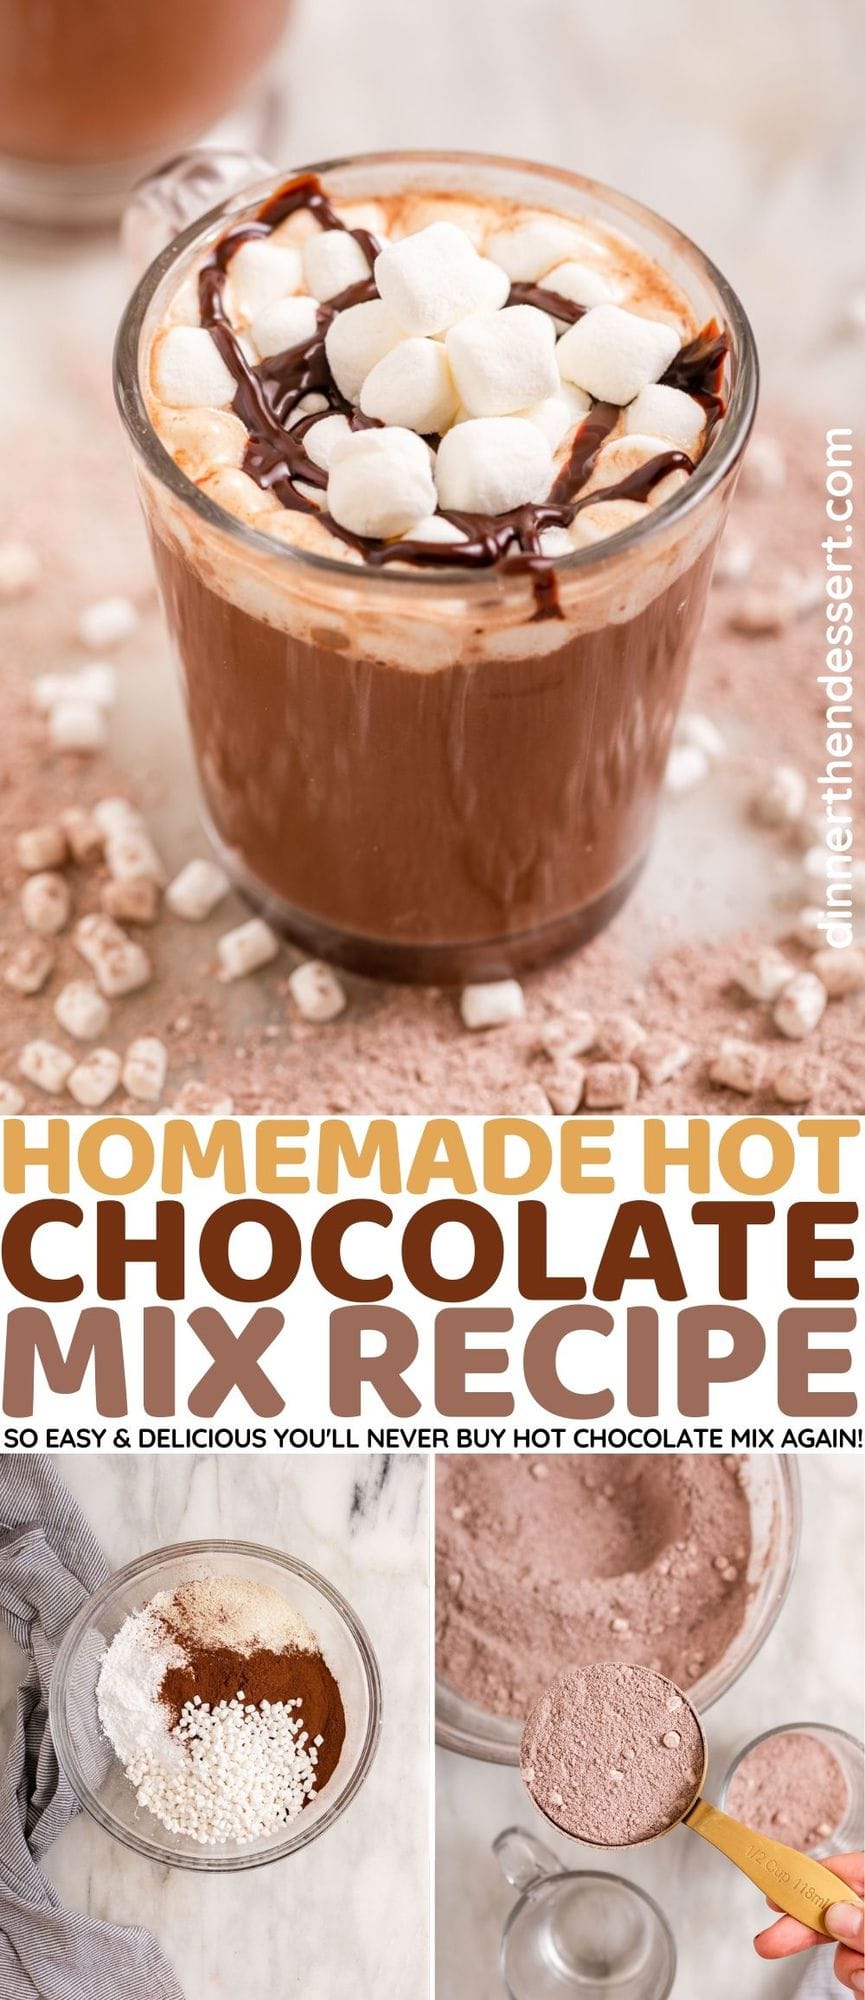 Hot Chocolate Mix Prepared in Glass Mug with Marshmallows and Chocolate Sauce collage